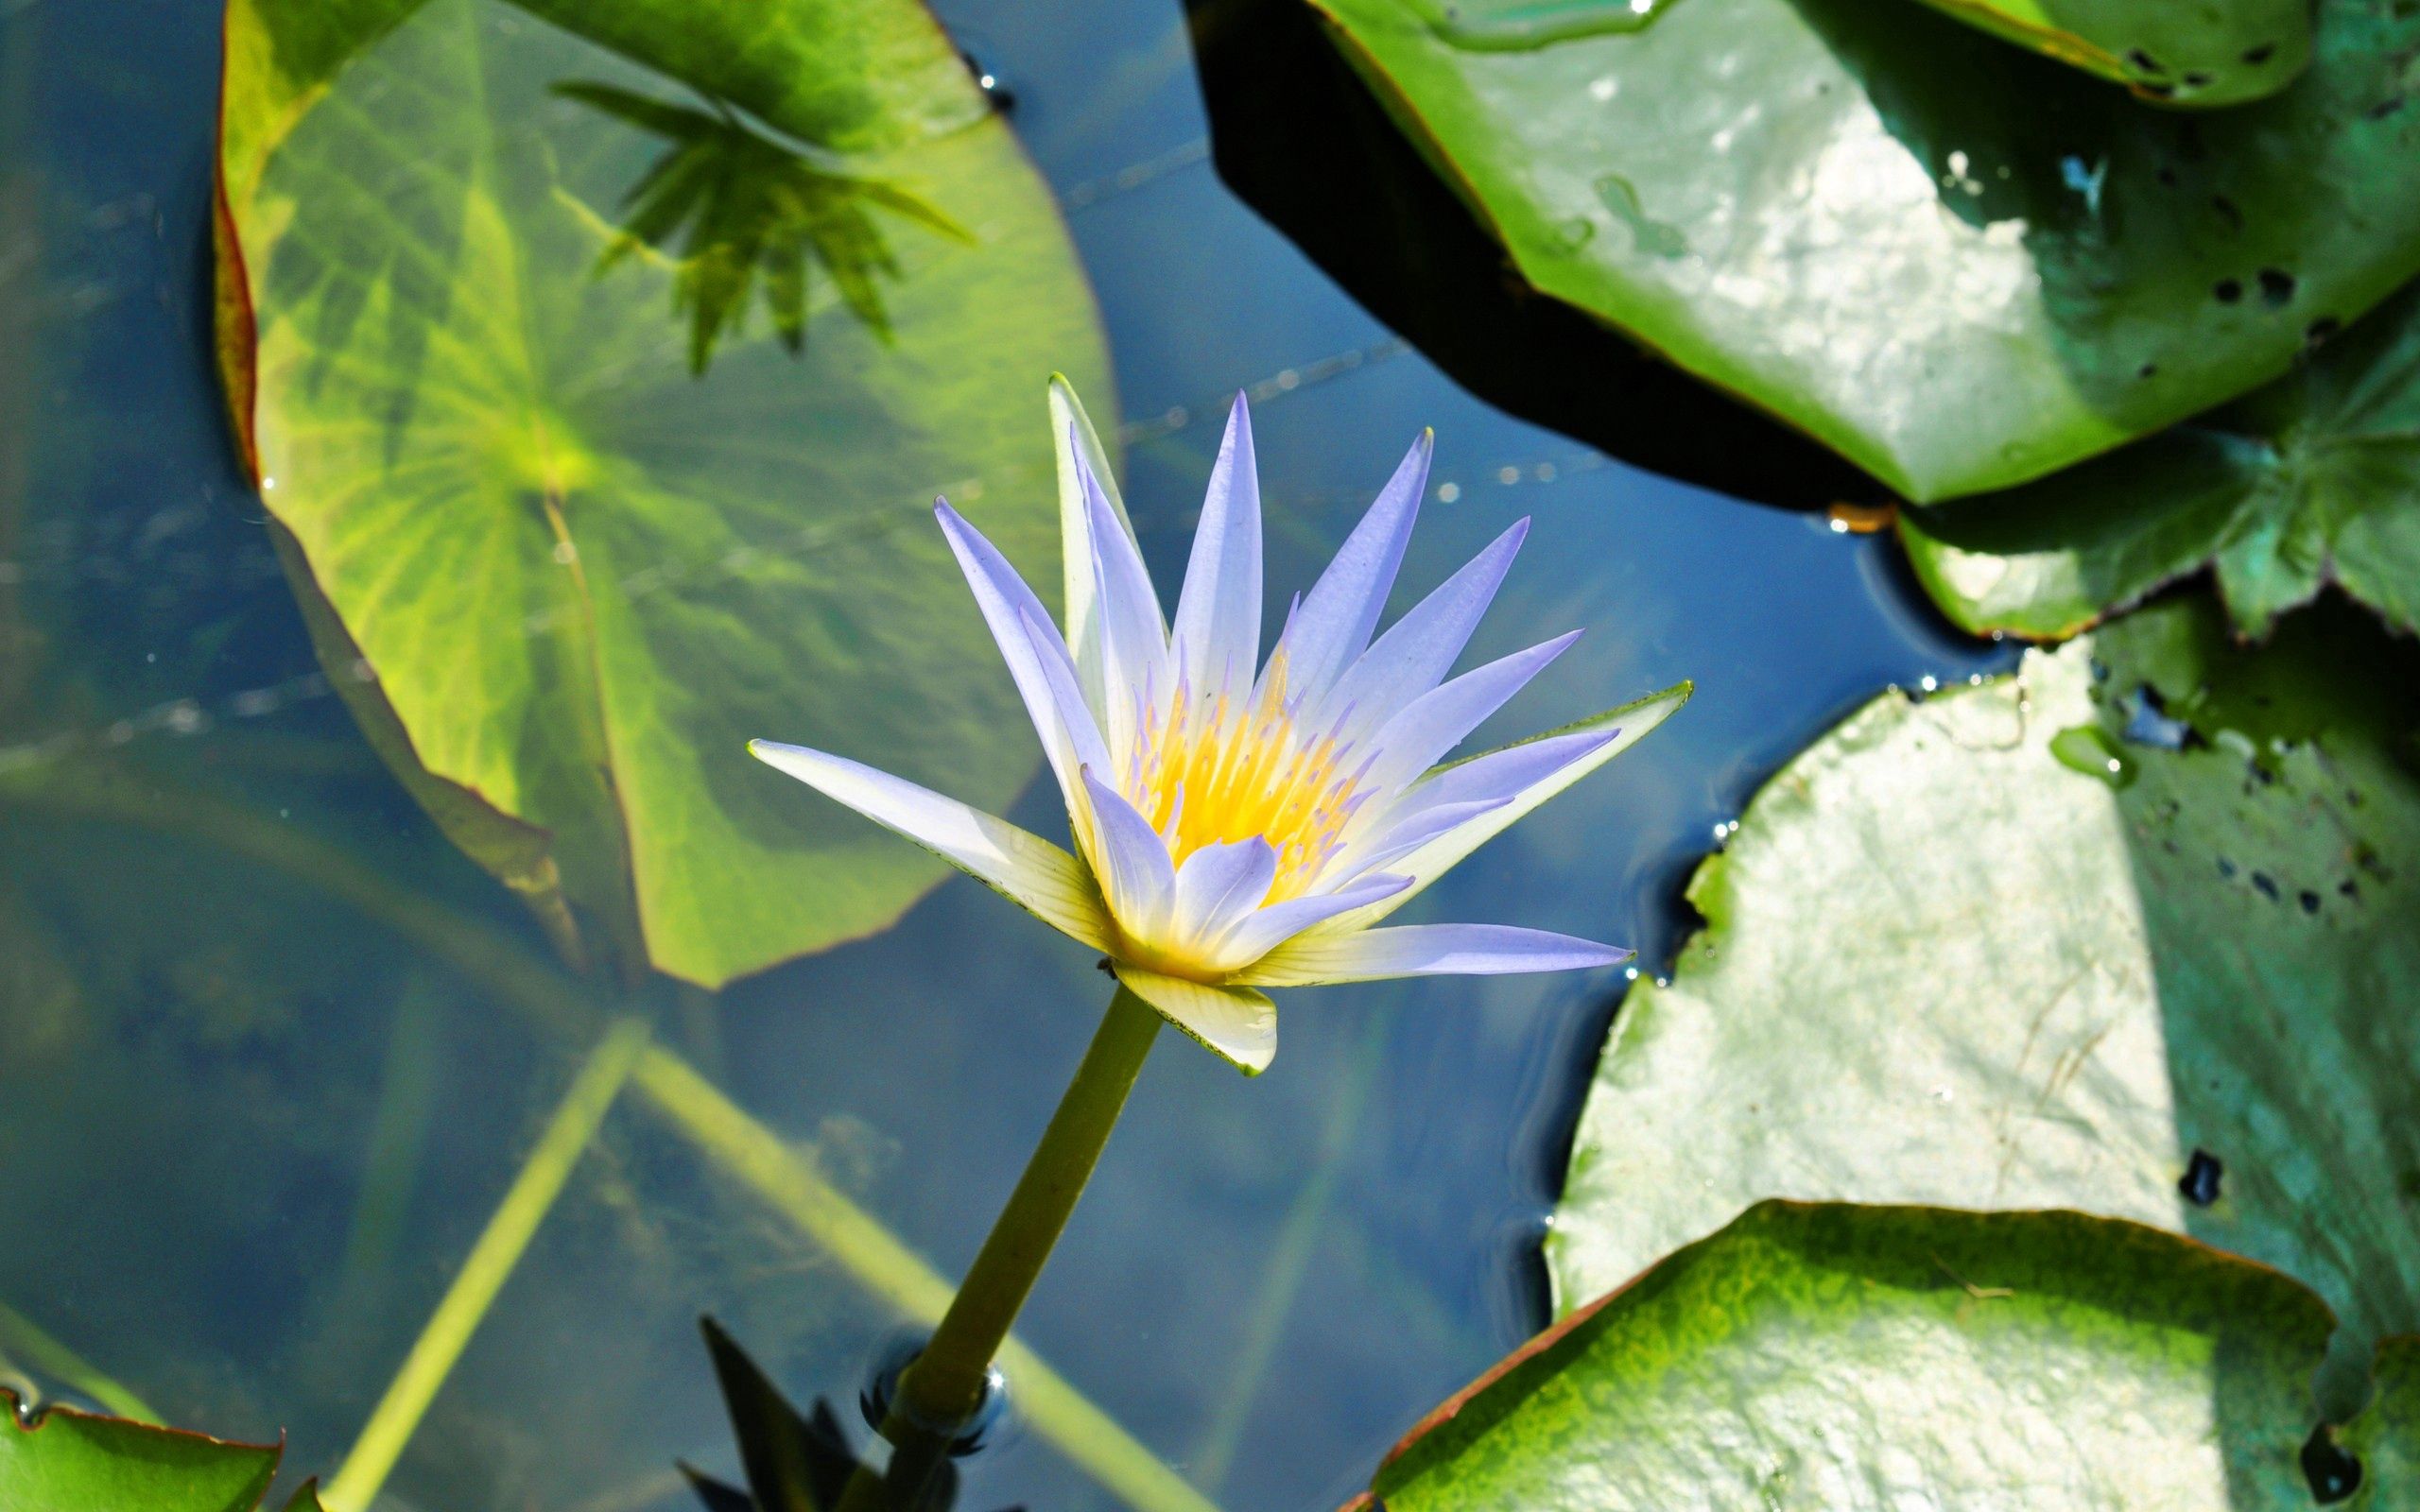 drops, water lily, flowers, water, leaves, swamp, greens wallpaper for mobile